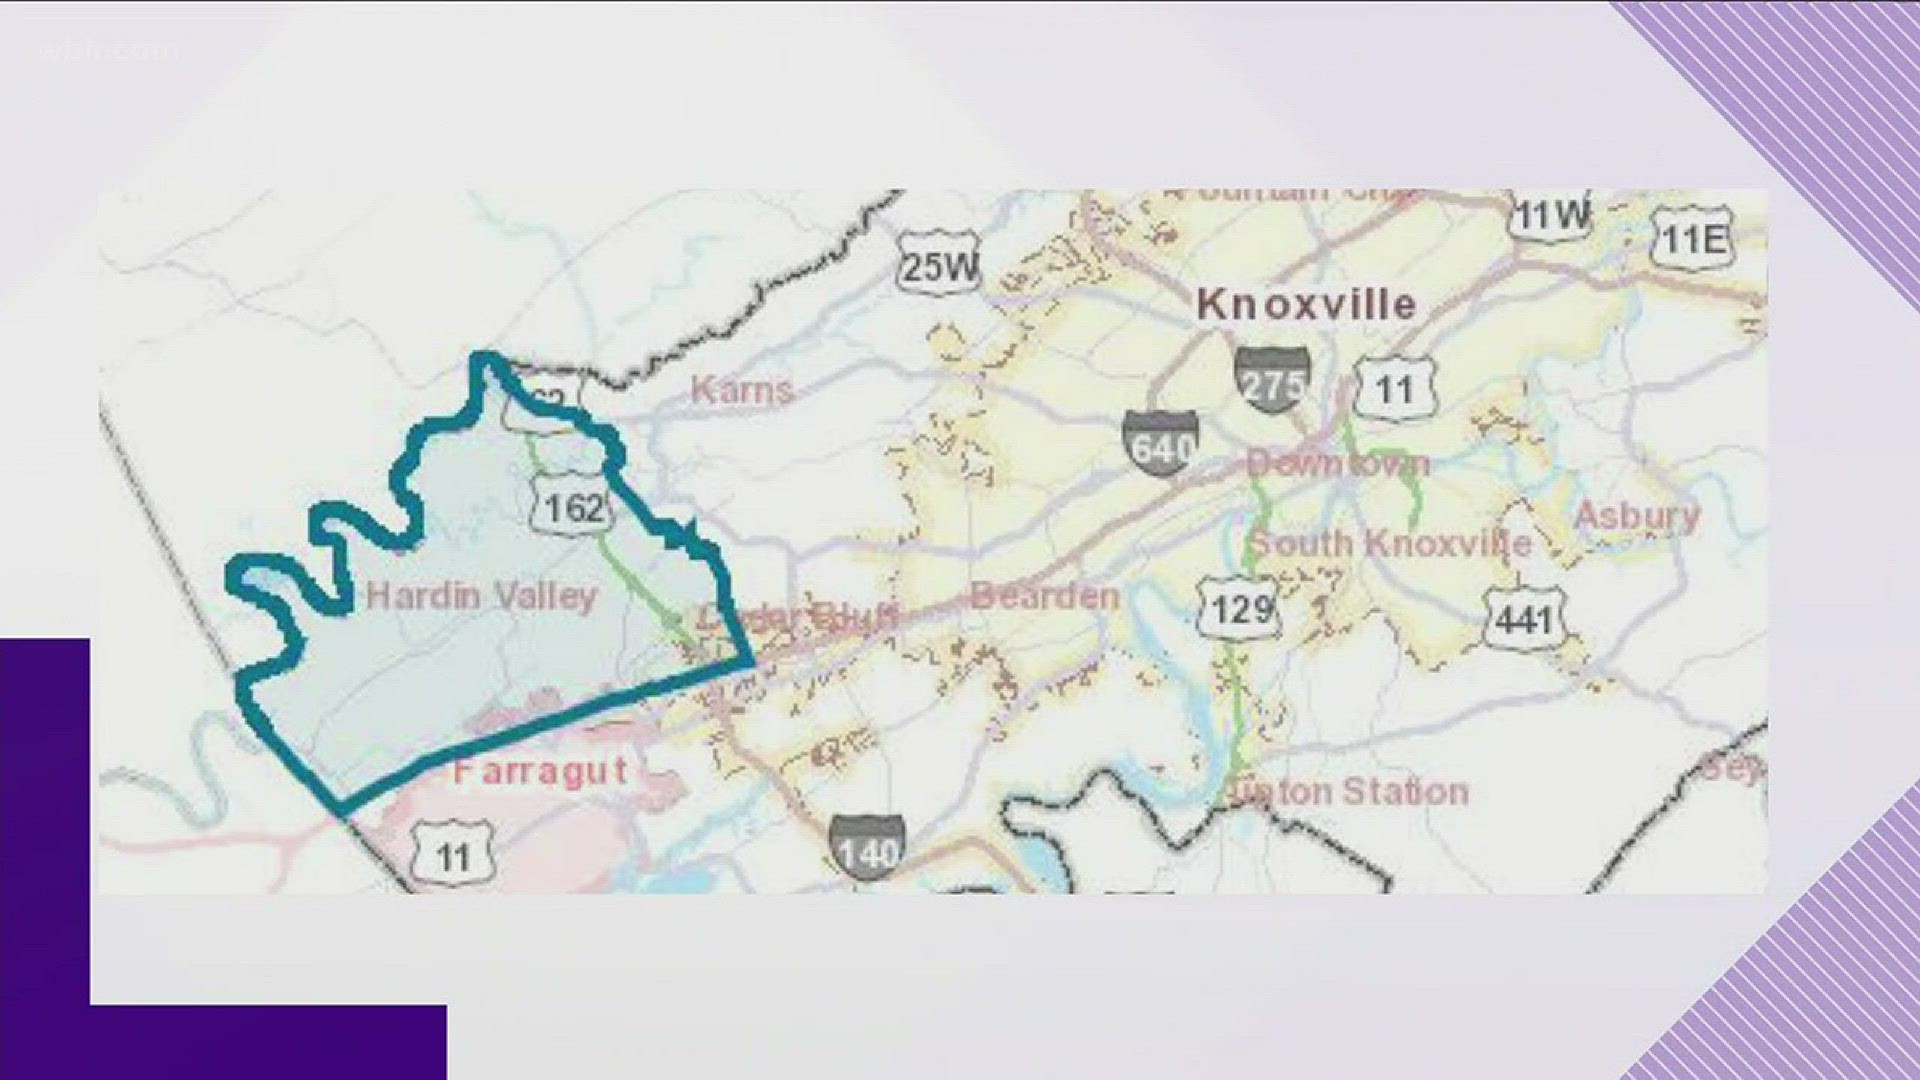 Knox County Planning is holding a community meeting about its study of traffic and mobility in the Hardin Valley area.